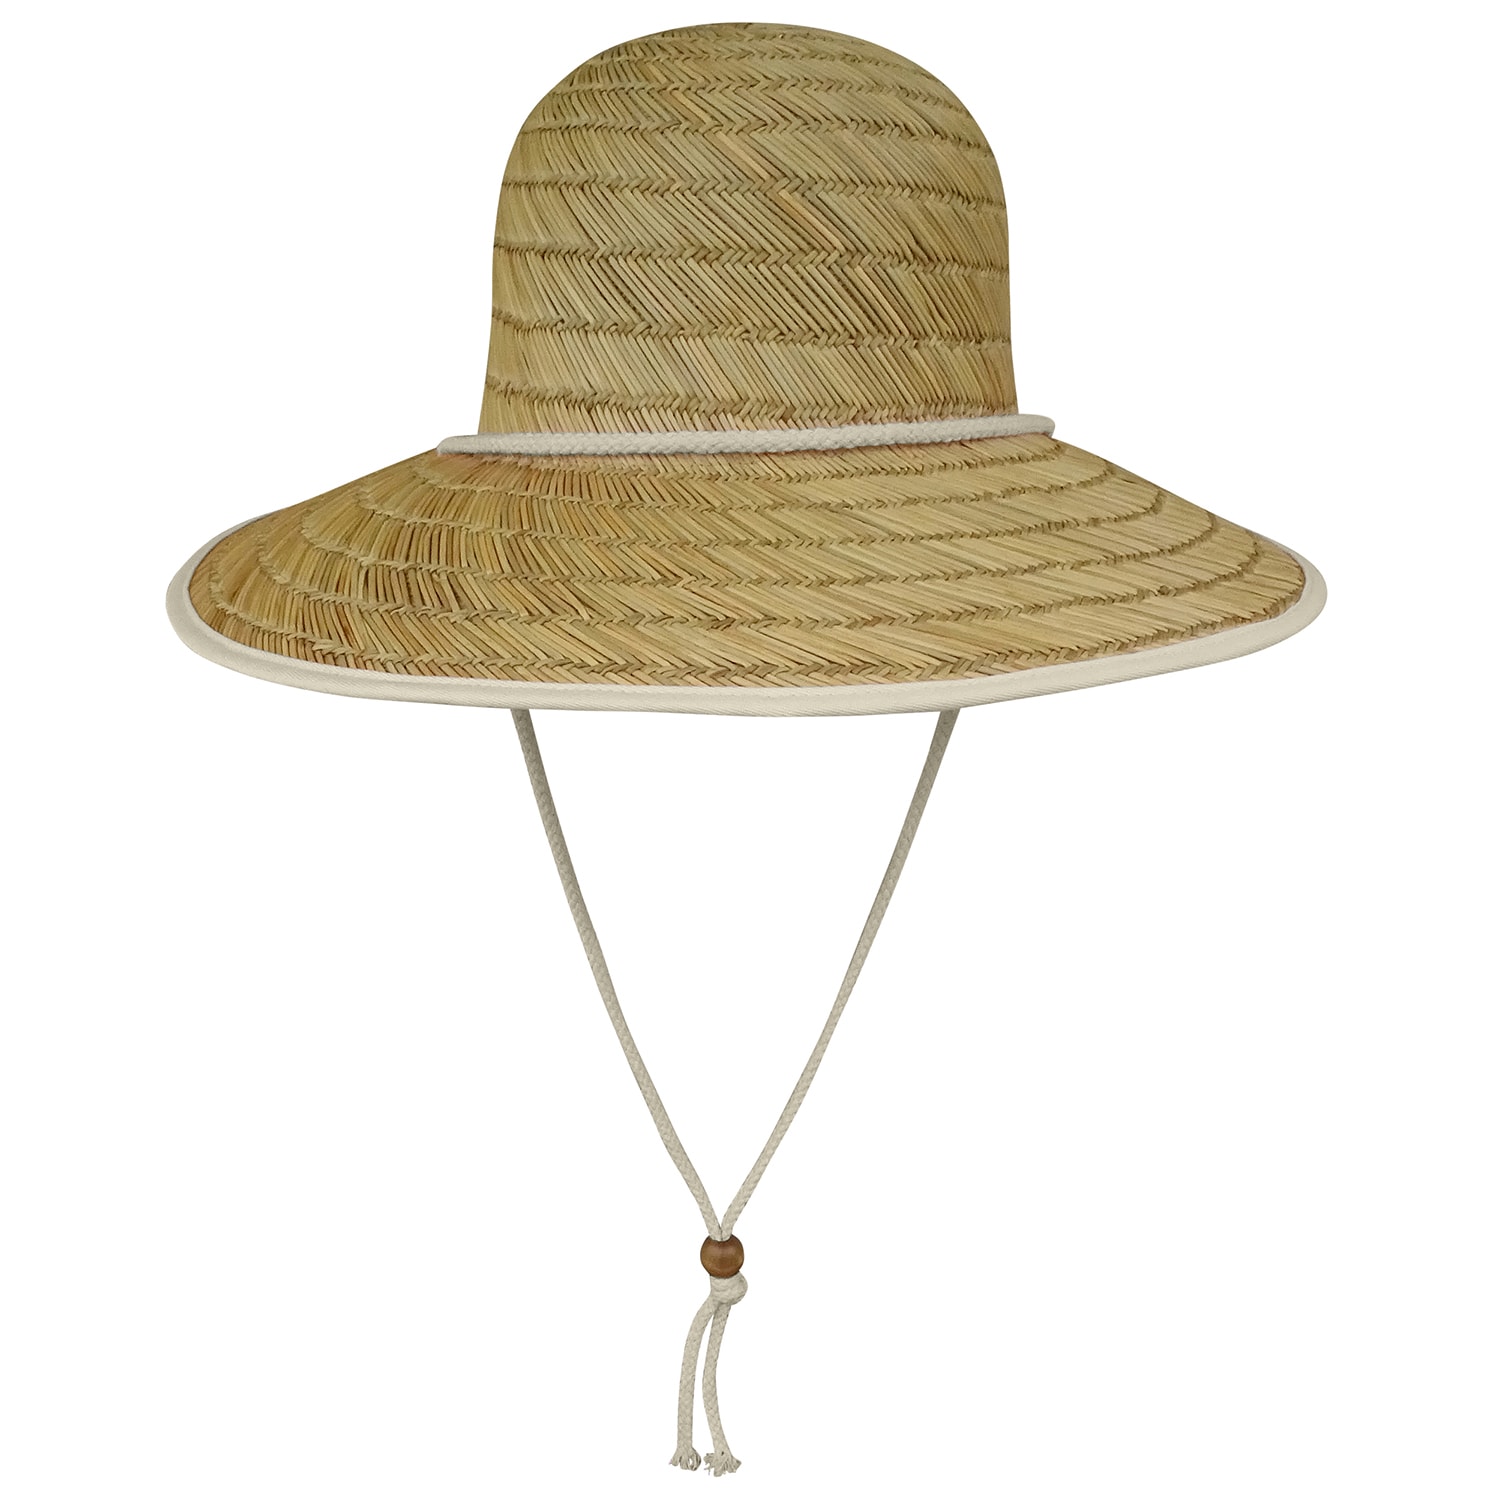 Infinity Brands Women's Natural Straw Wide-brim Hat (Adult) in the